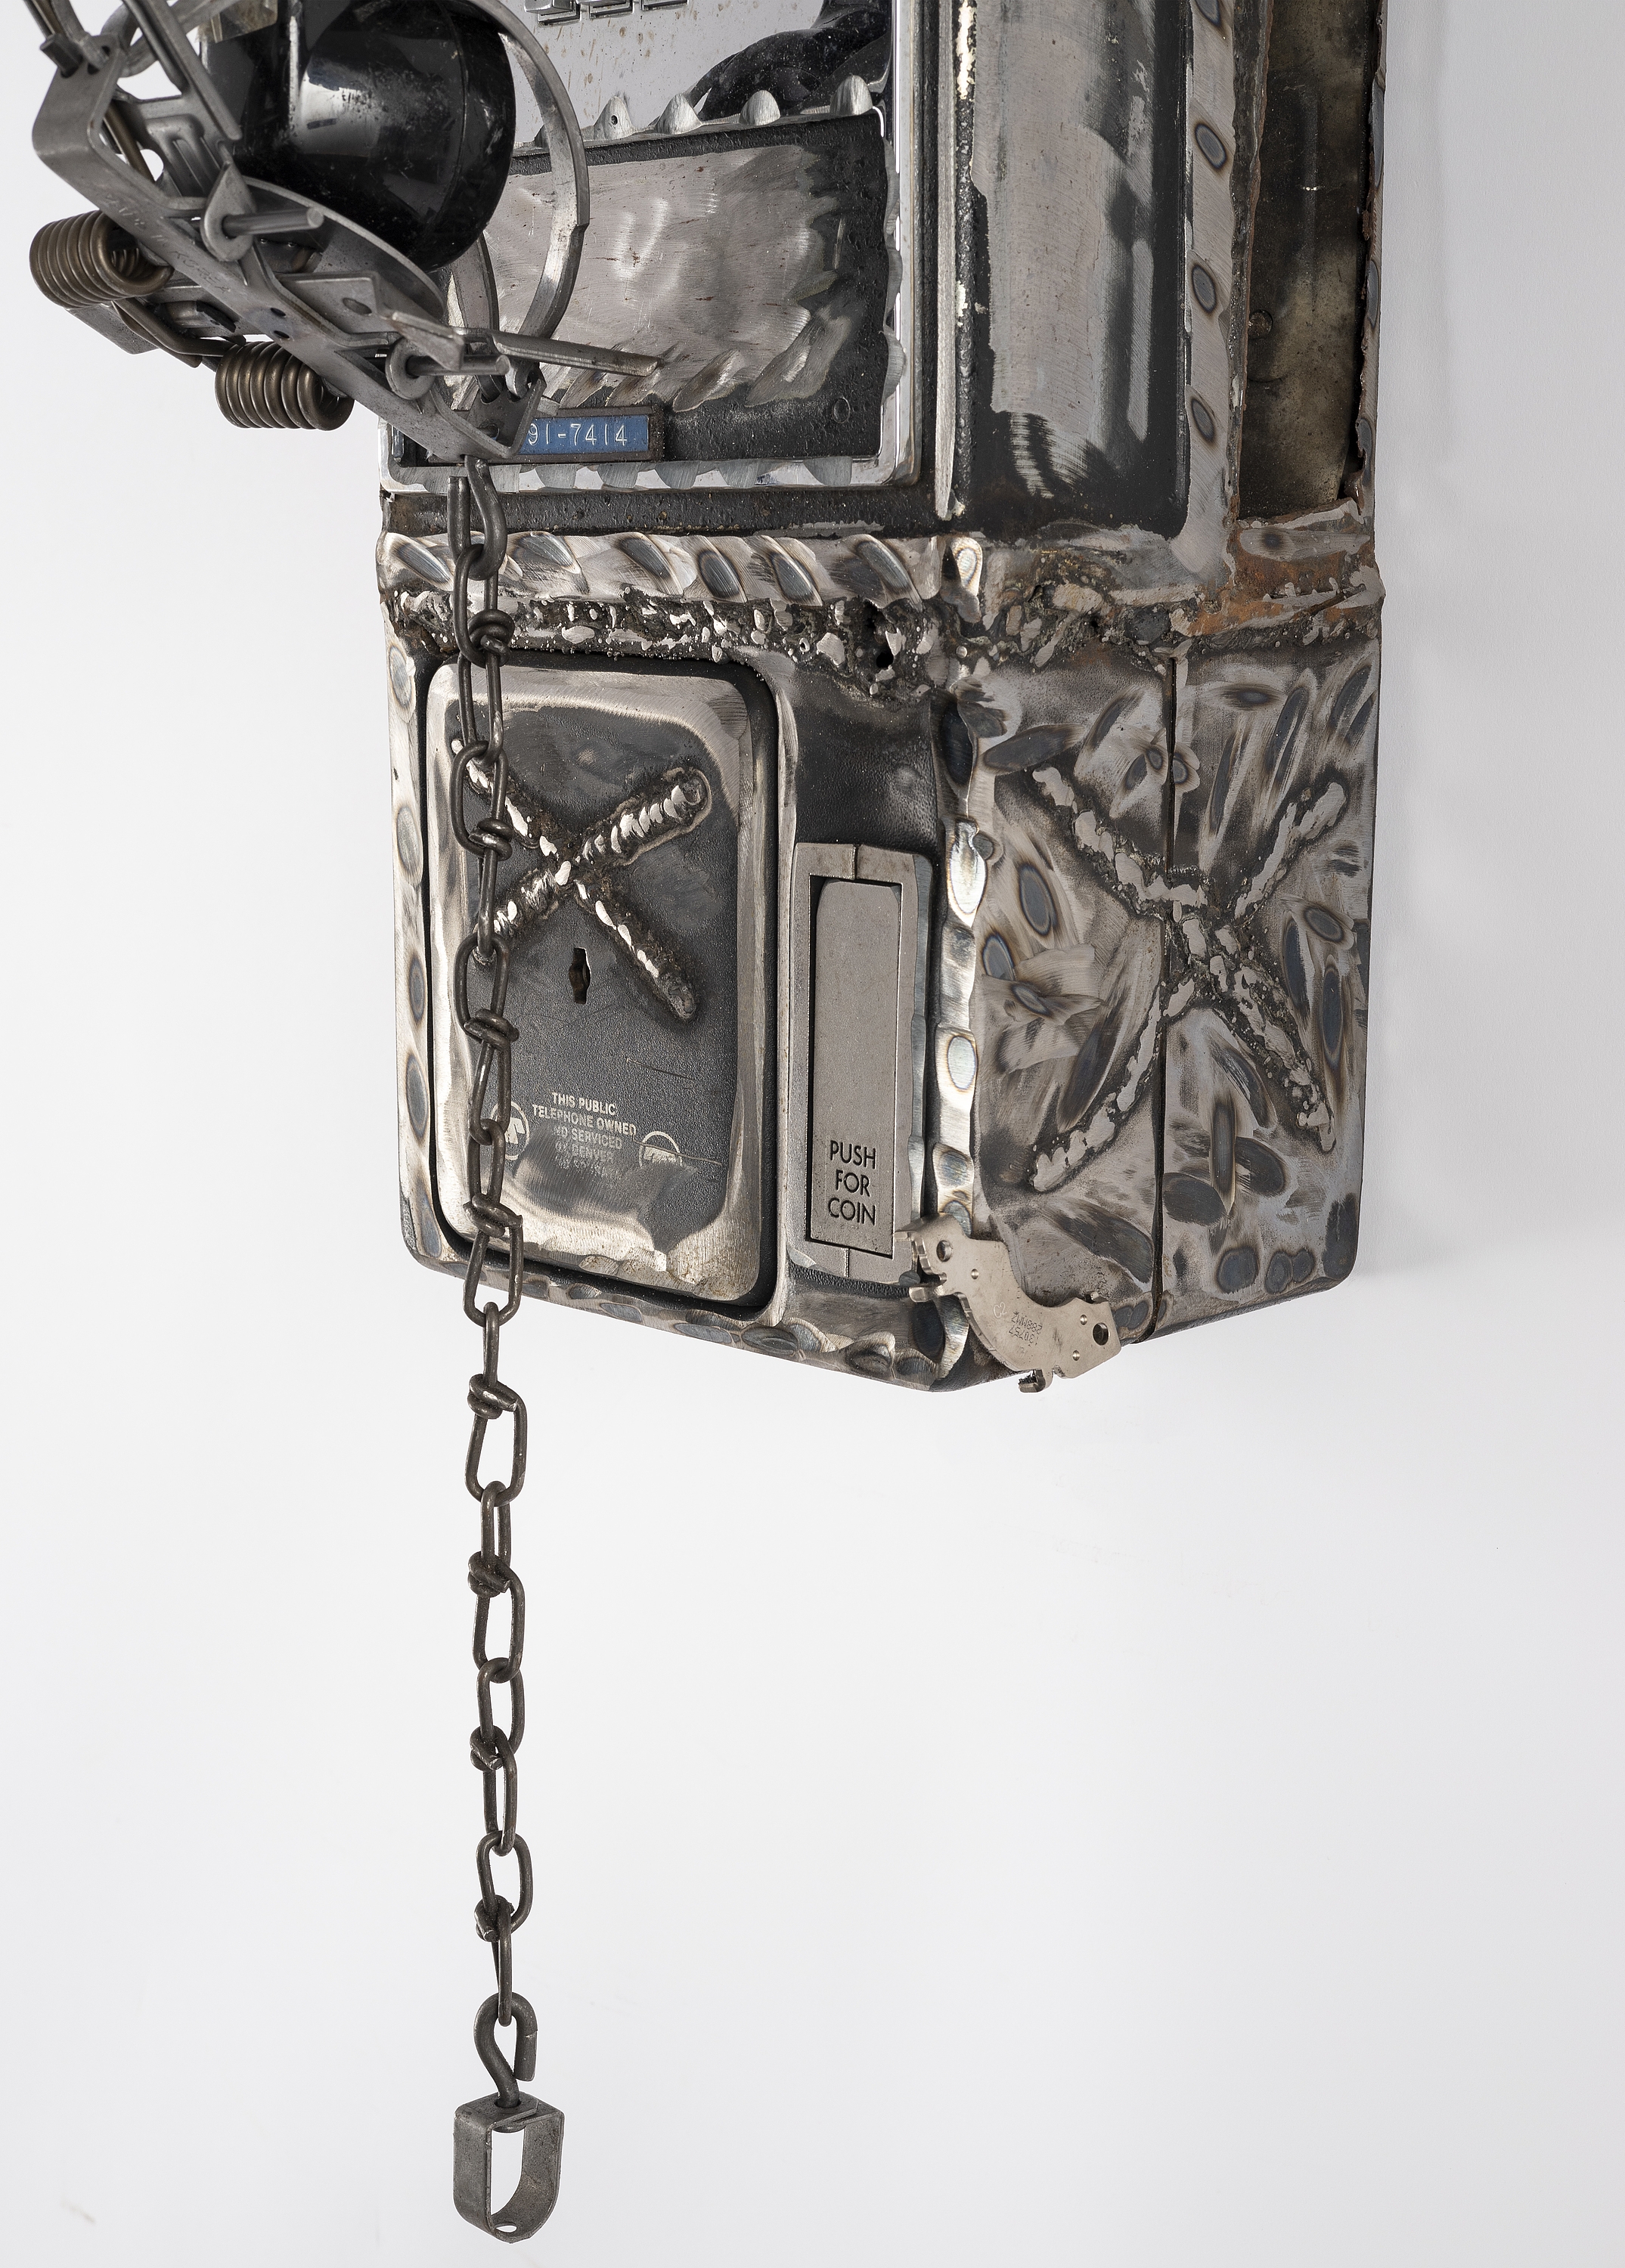 Artwork by Jason Matthew Lee, BFP:time791-7414, Made of hardrive magnets, animal trap, on cut and welded payphones